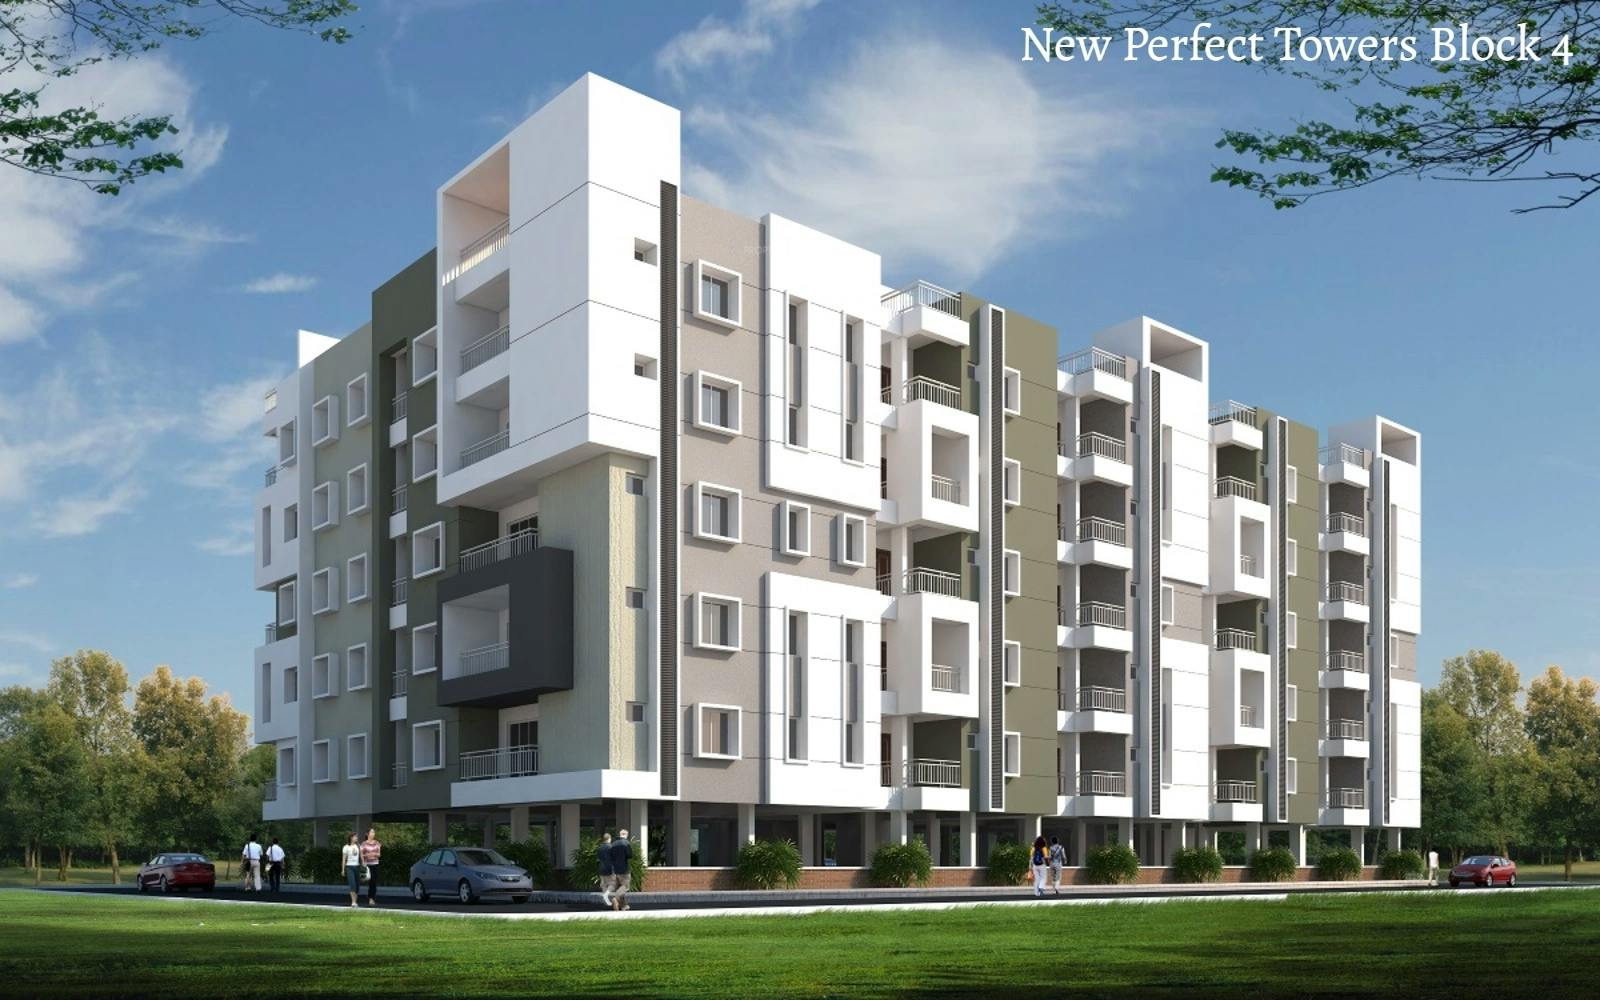 Image of New Perfect Towers Block 4